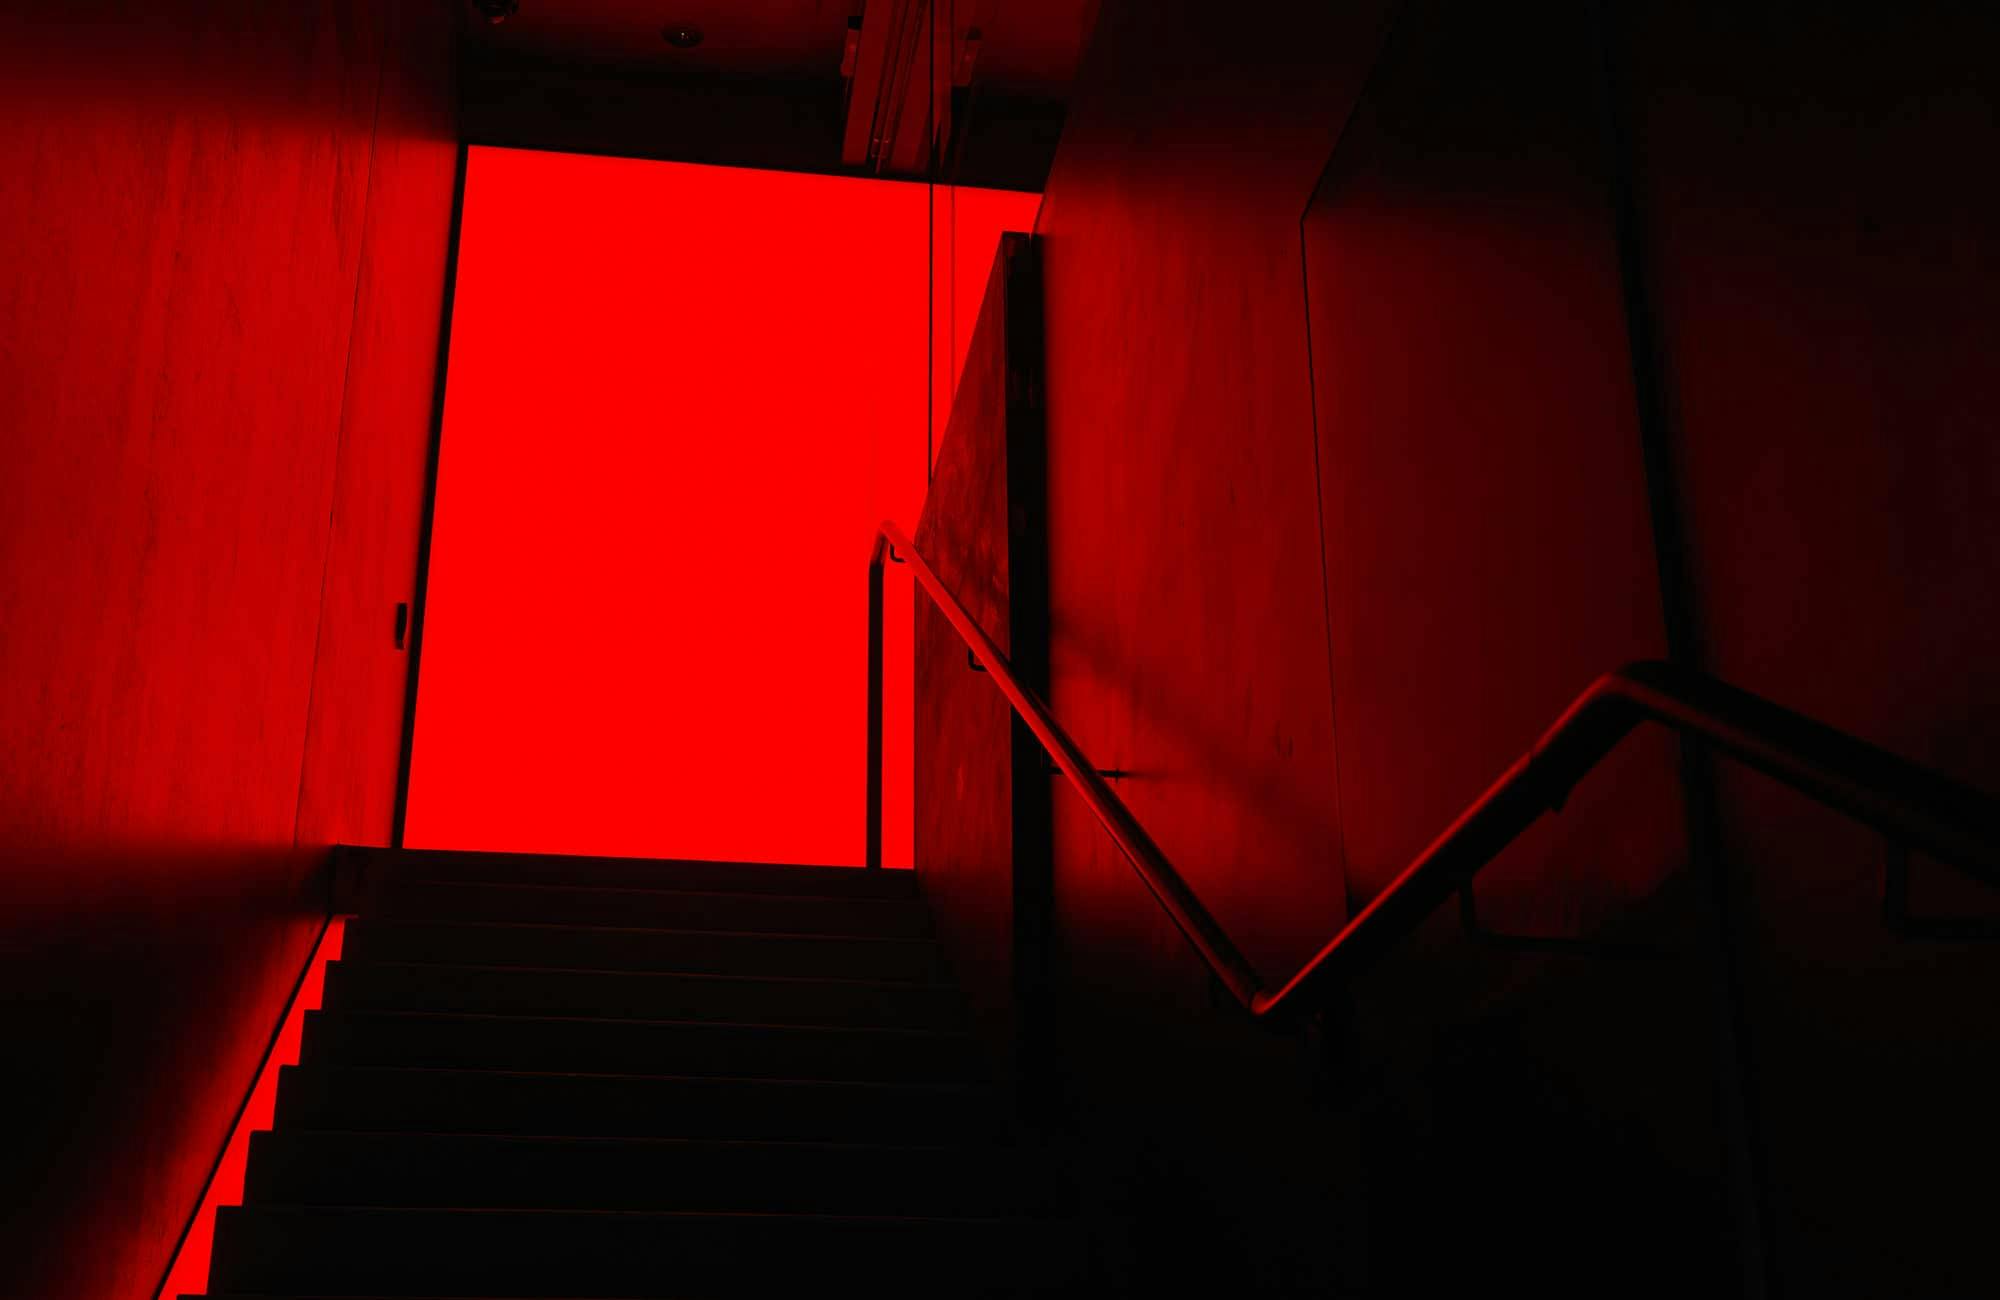 Dark staircase leading to a red door